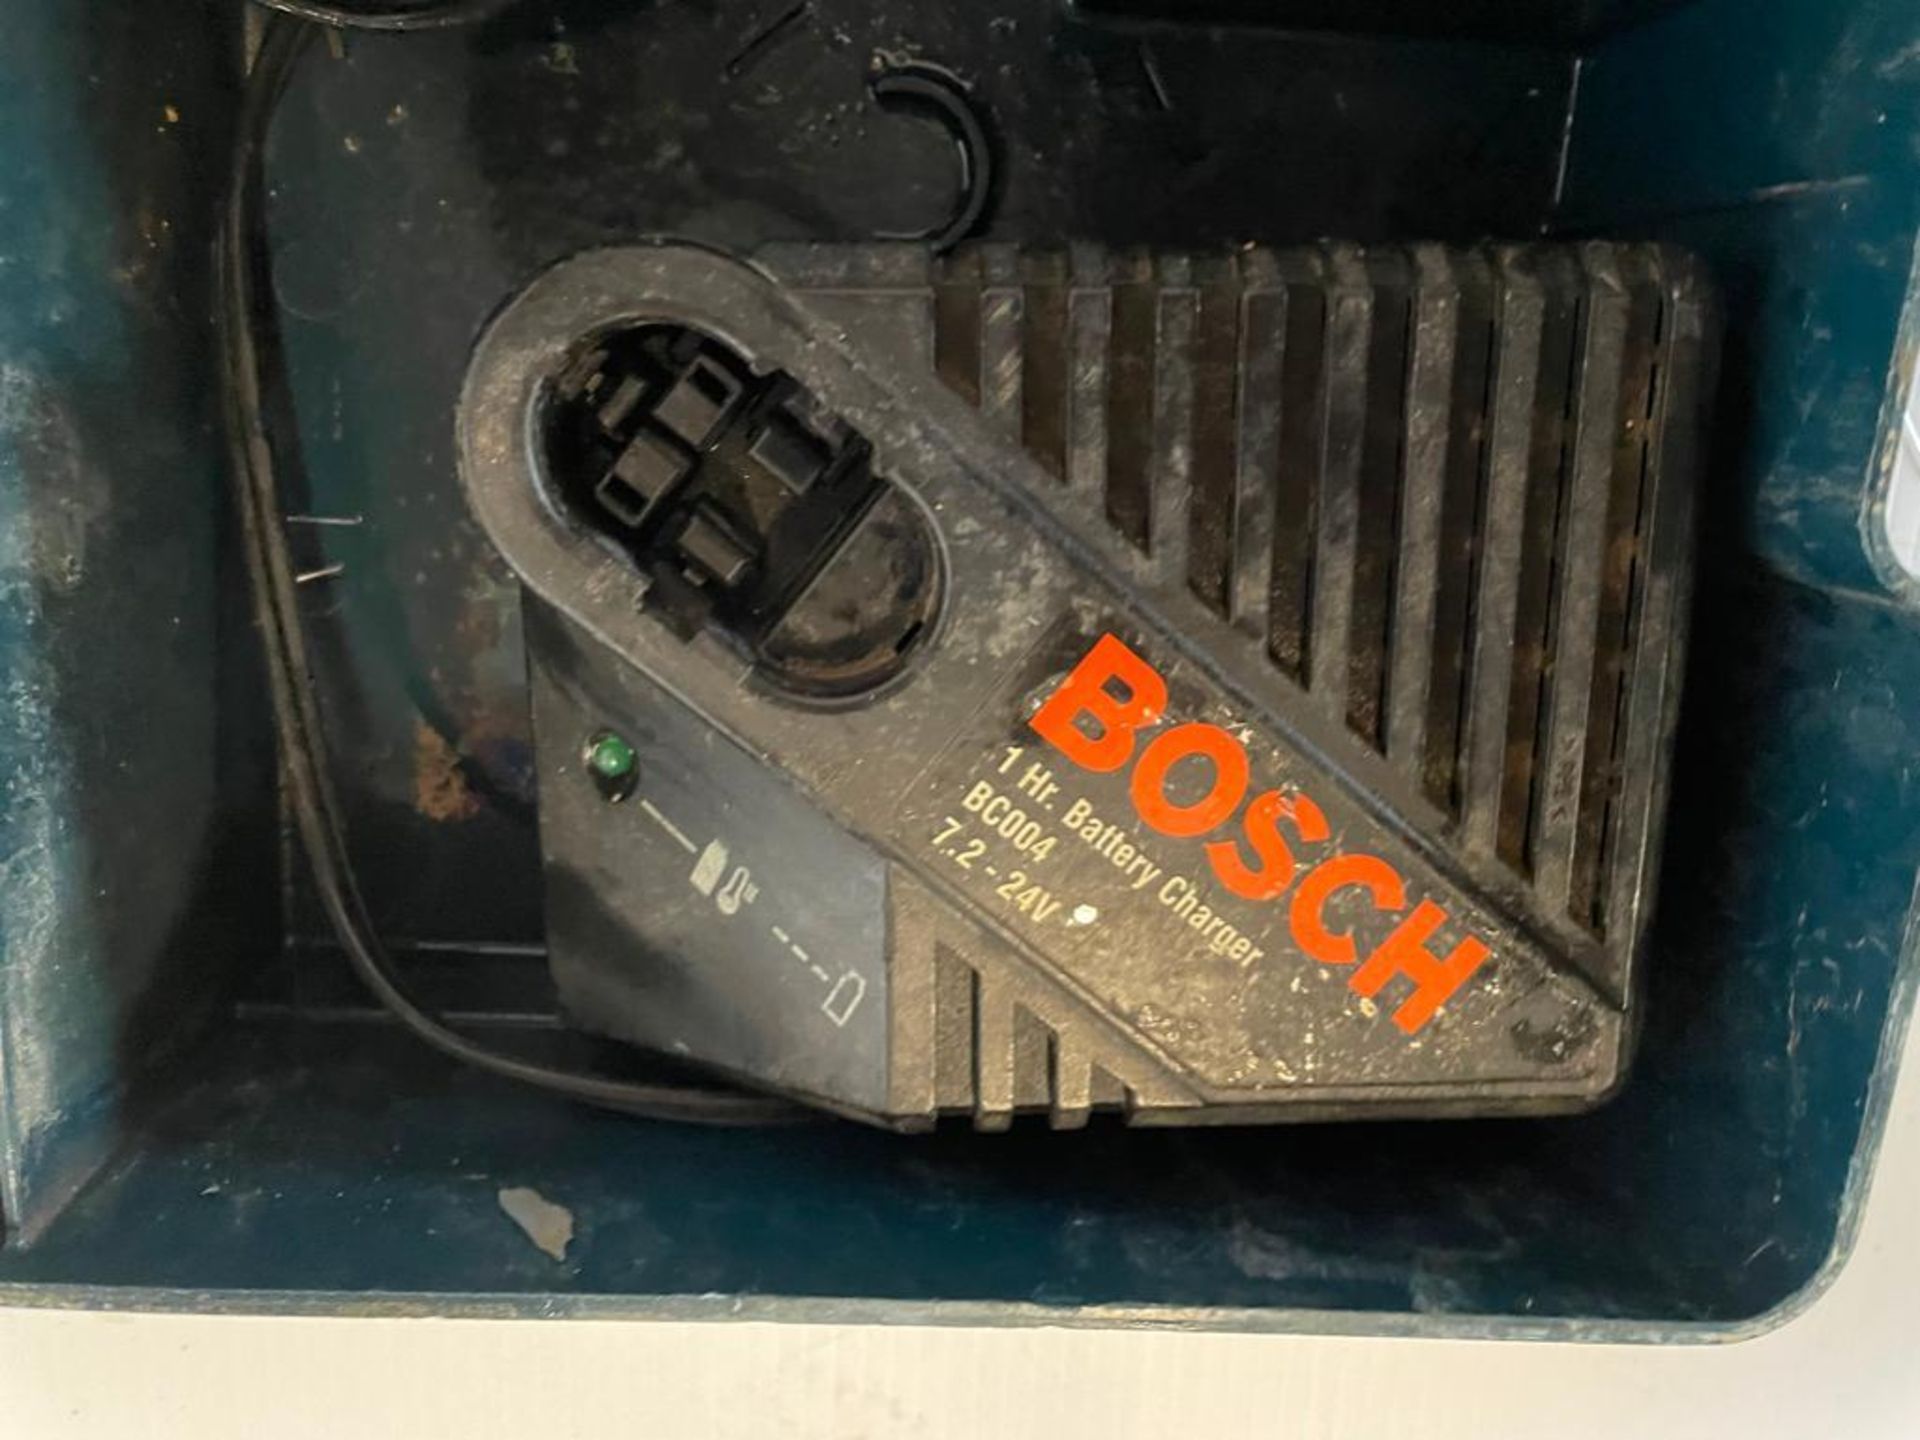 Bosch 11524 Rotary Hammer, 24V. Located in Hazelwood, MO - Image 9 of 9